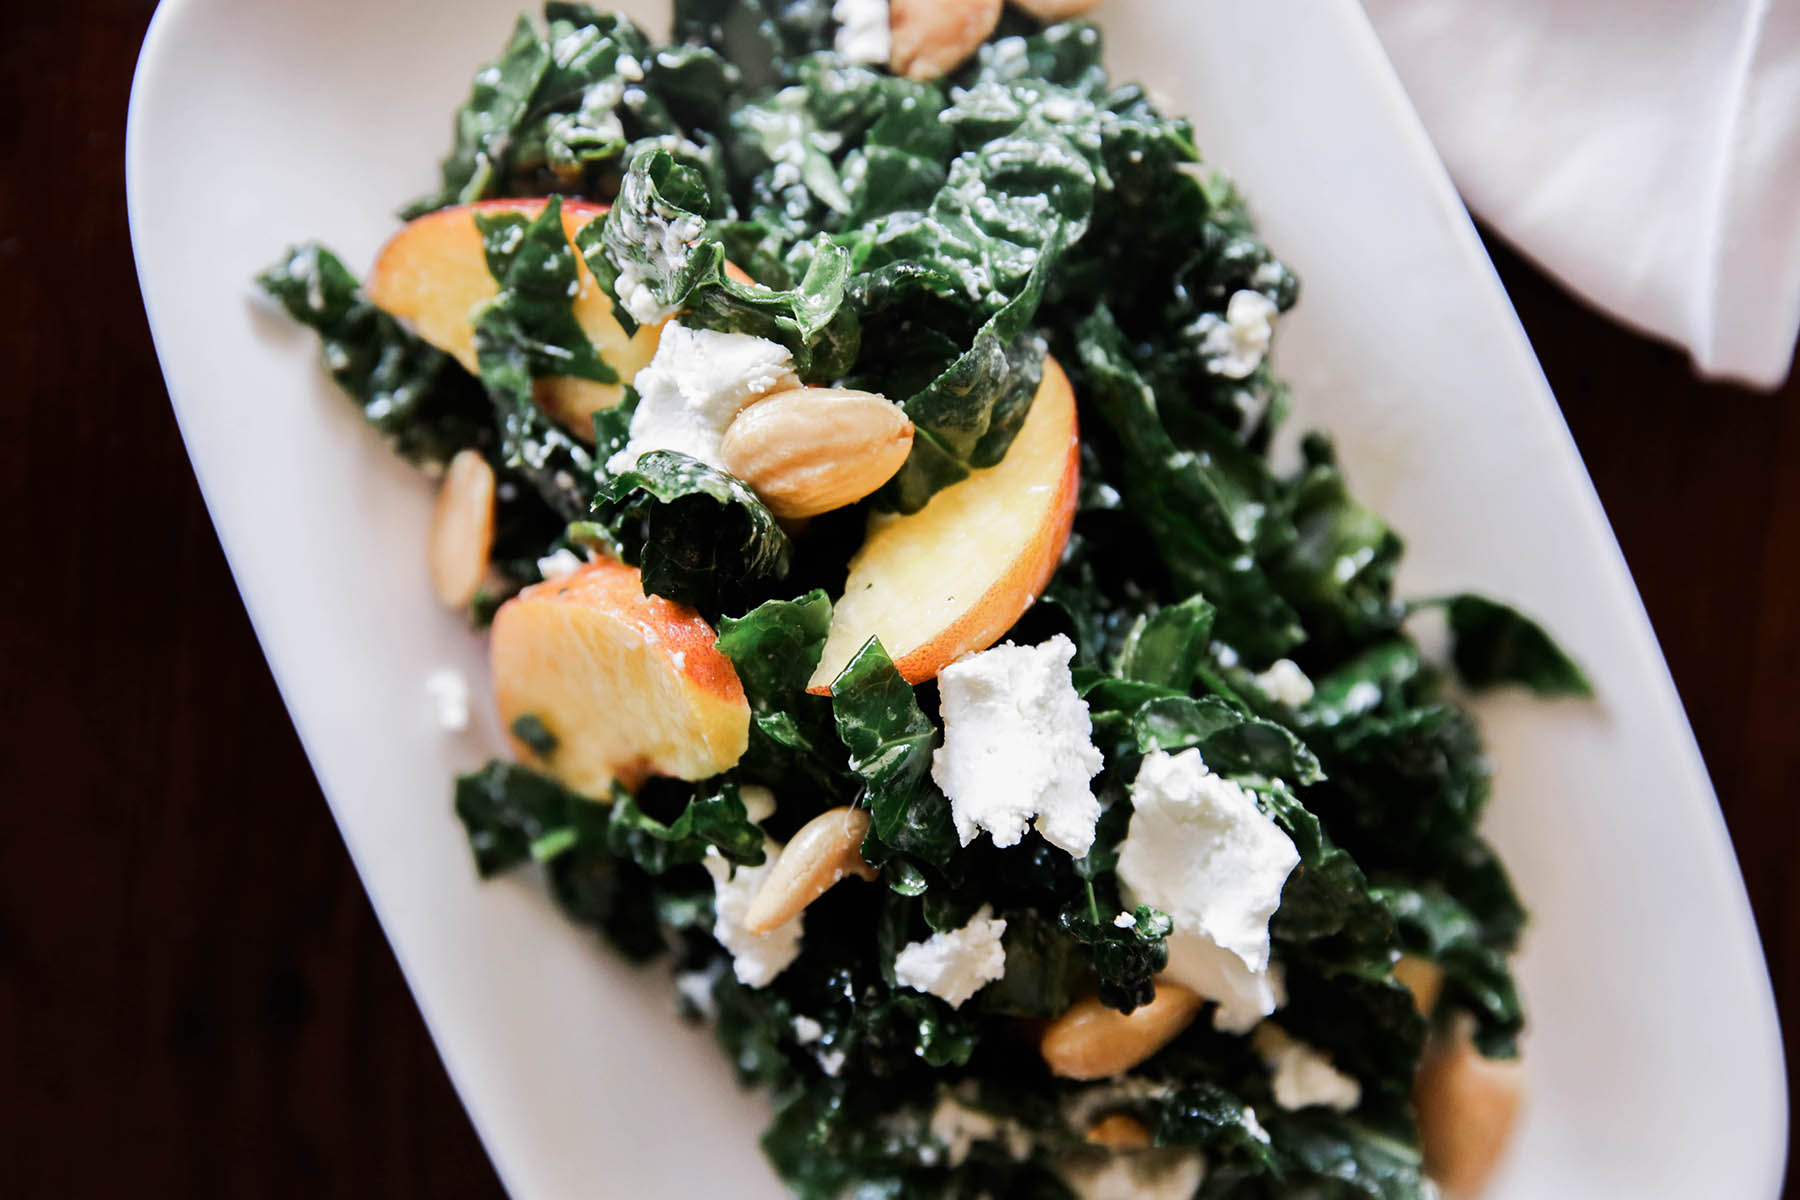 kale and stone fruit salad at Guerneville restaurants boon eat + drink